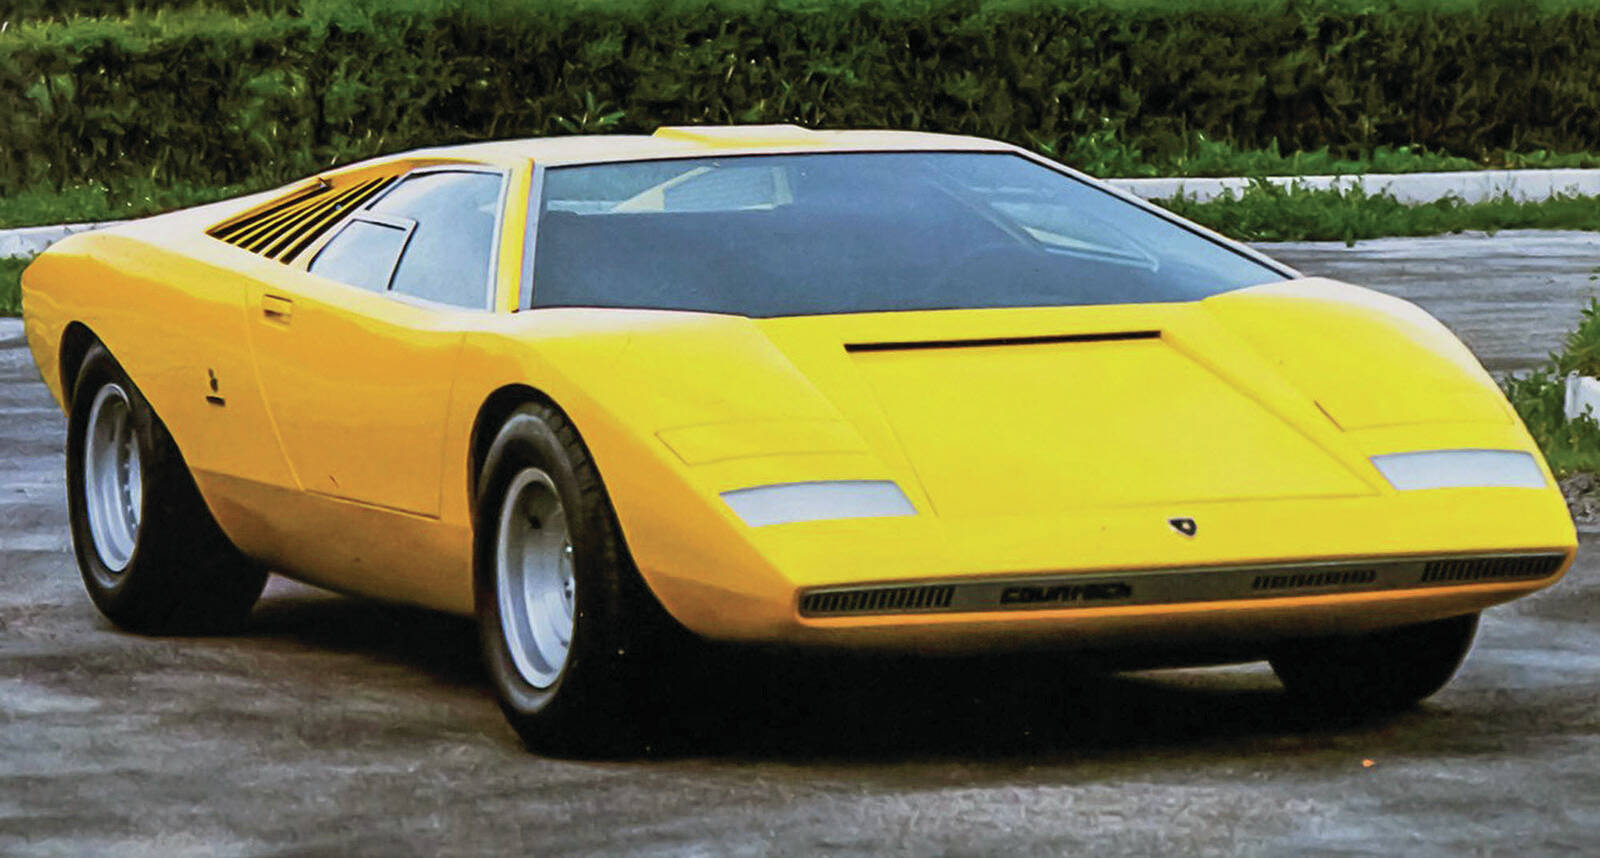 The P500 was the prototype for the Countach in the early 1970s. PHOTO: LAMBORGHINI